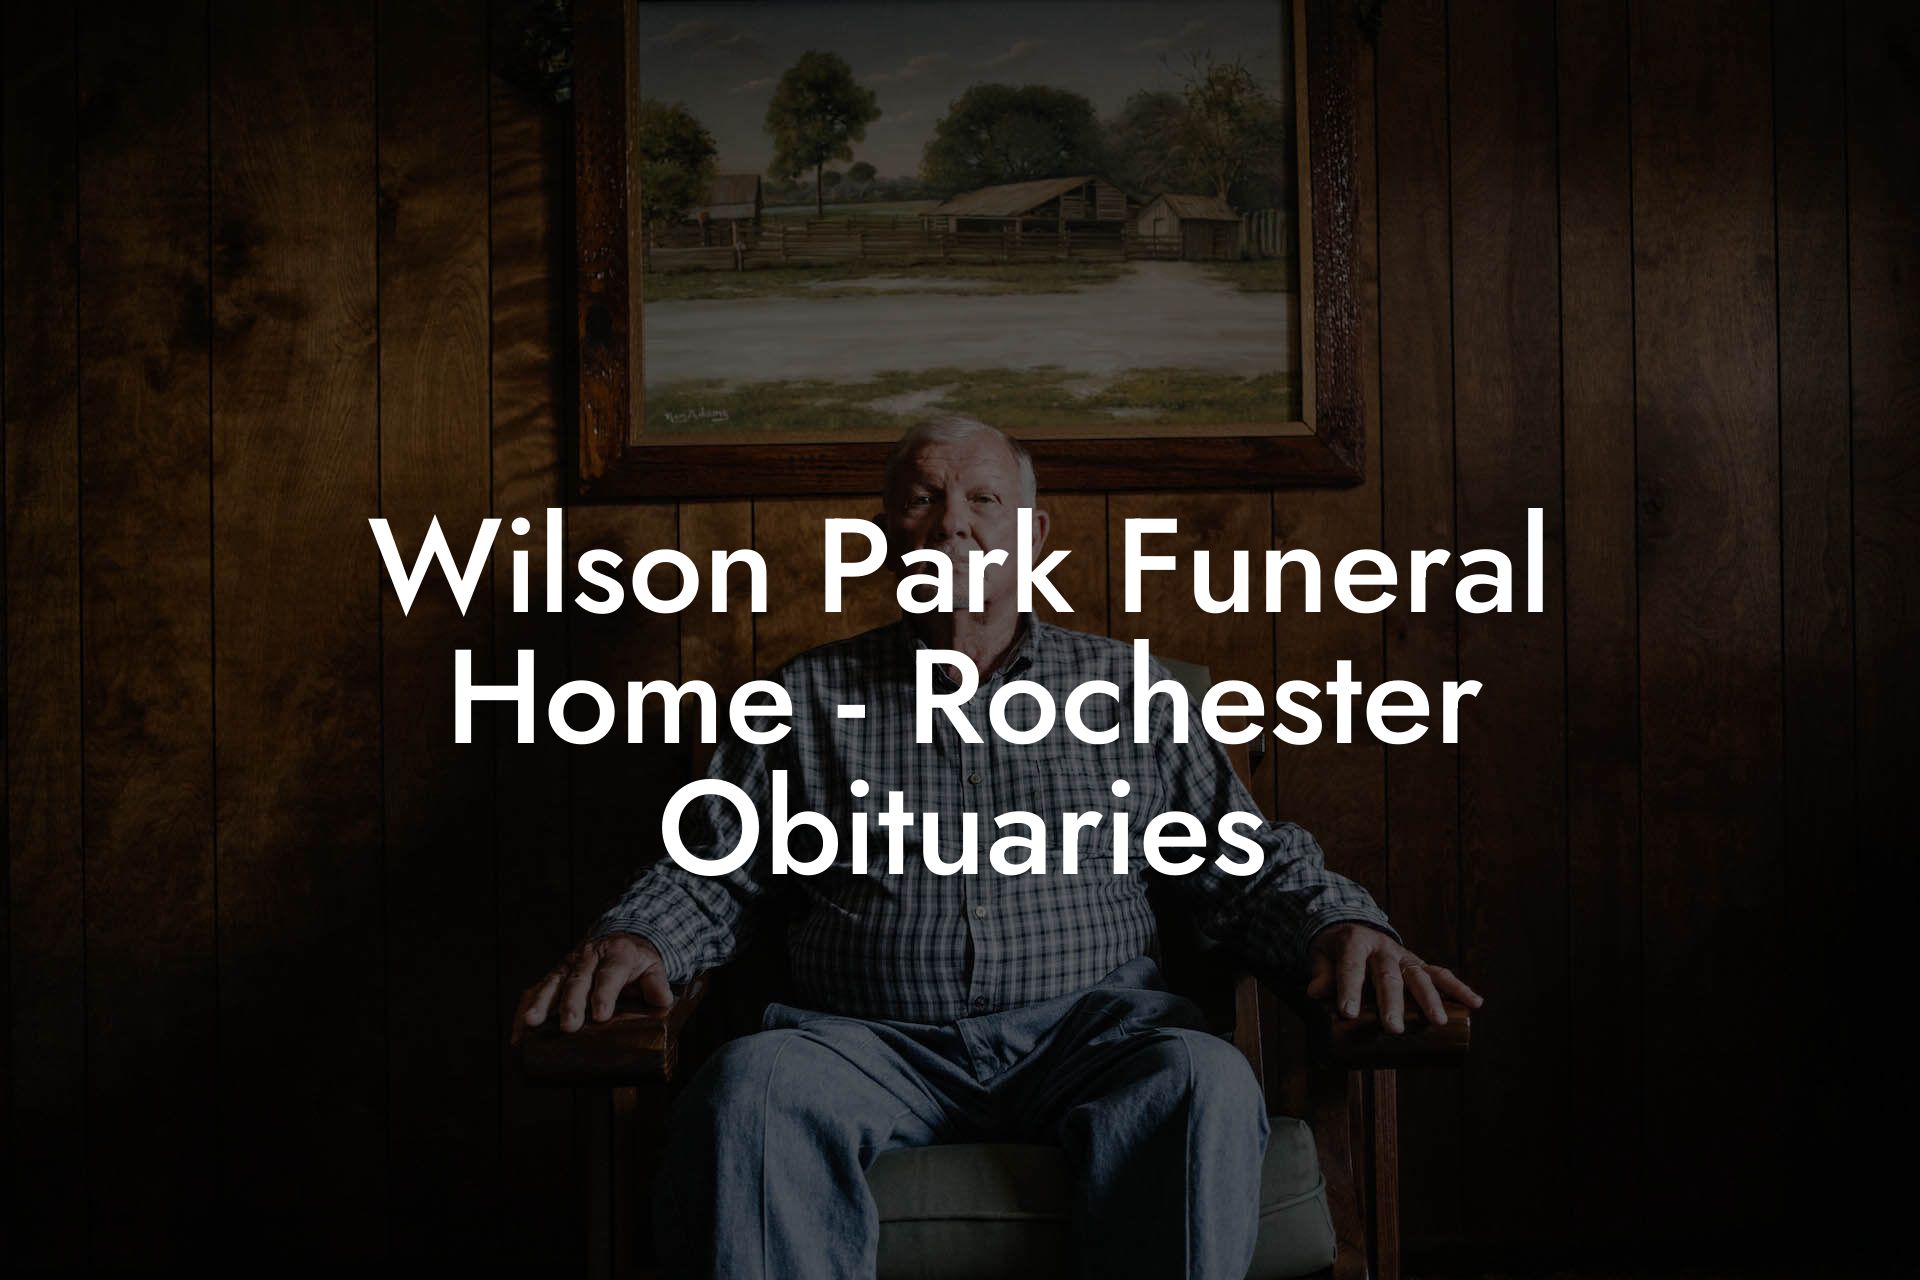 Wilson Park Funeral Home - Rochester Obituaries